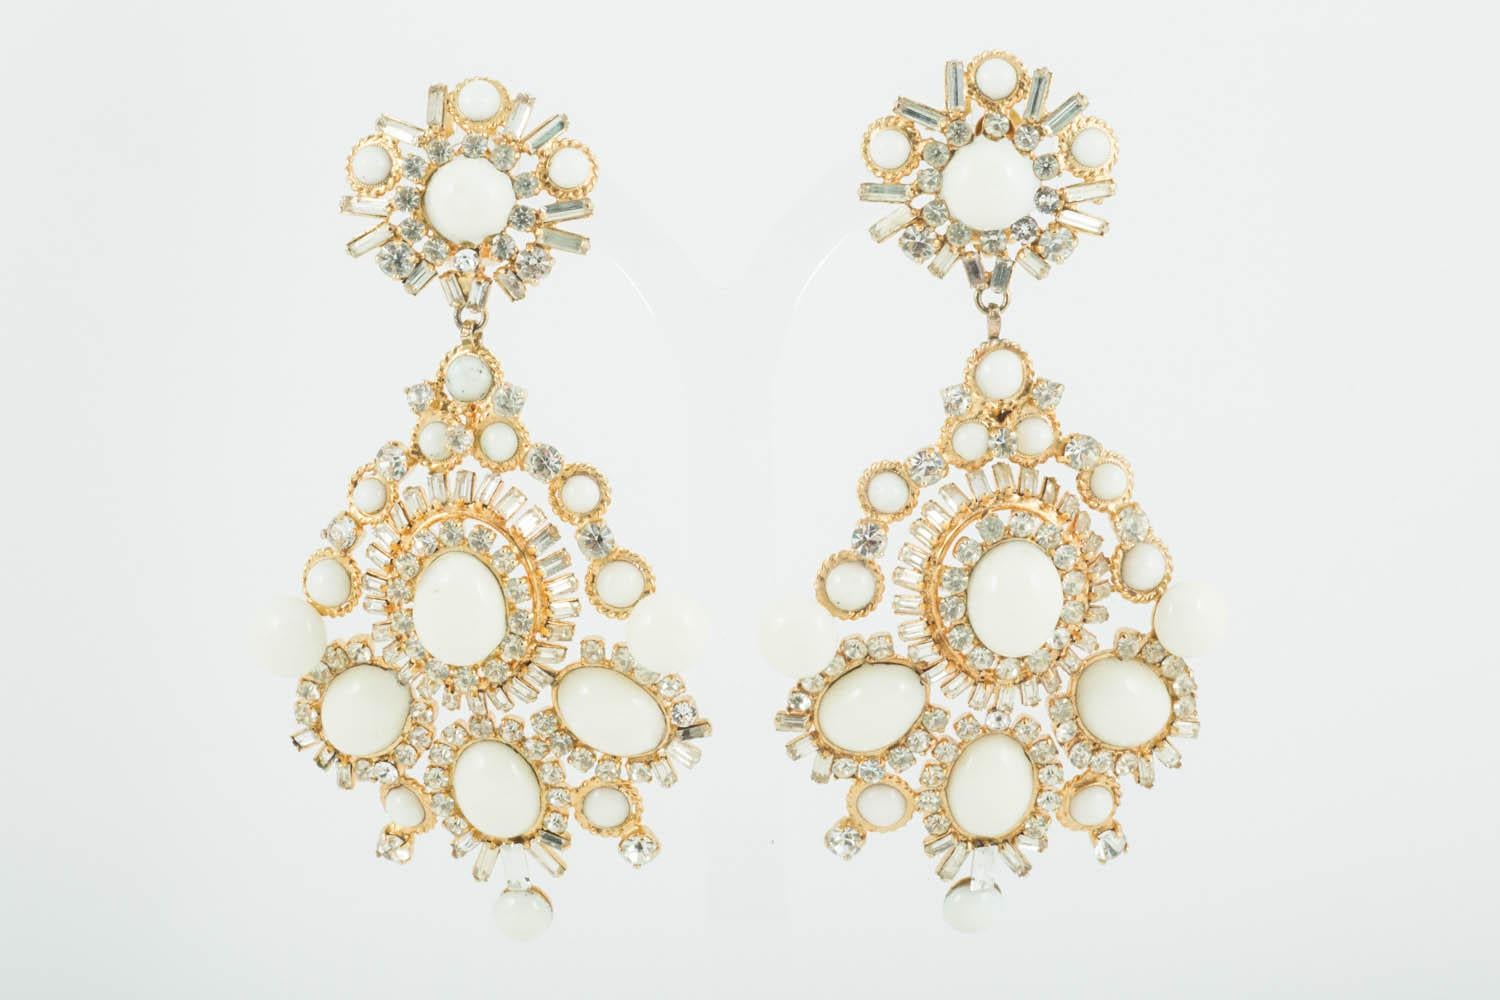 These exquisite poured glass earrings are true statement earrings, truly glamorous and quite, quite unique. Handmade in way made famous by and instantly recognisable as Maison Gripoix, ivory coloured poured glass  and clear pastes are set in a